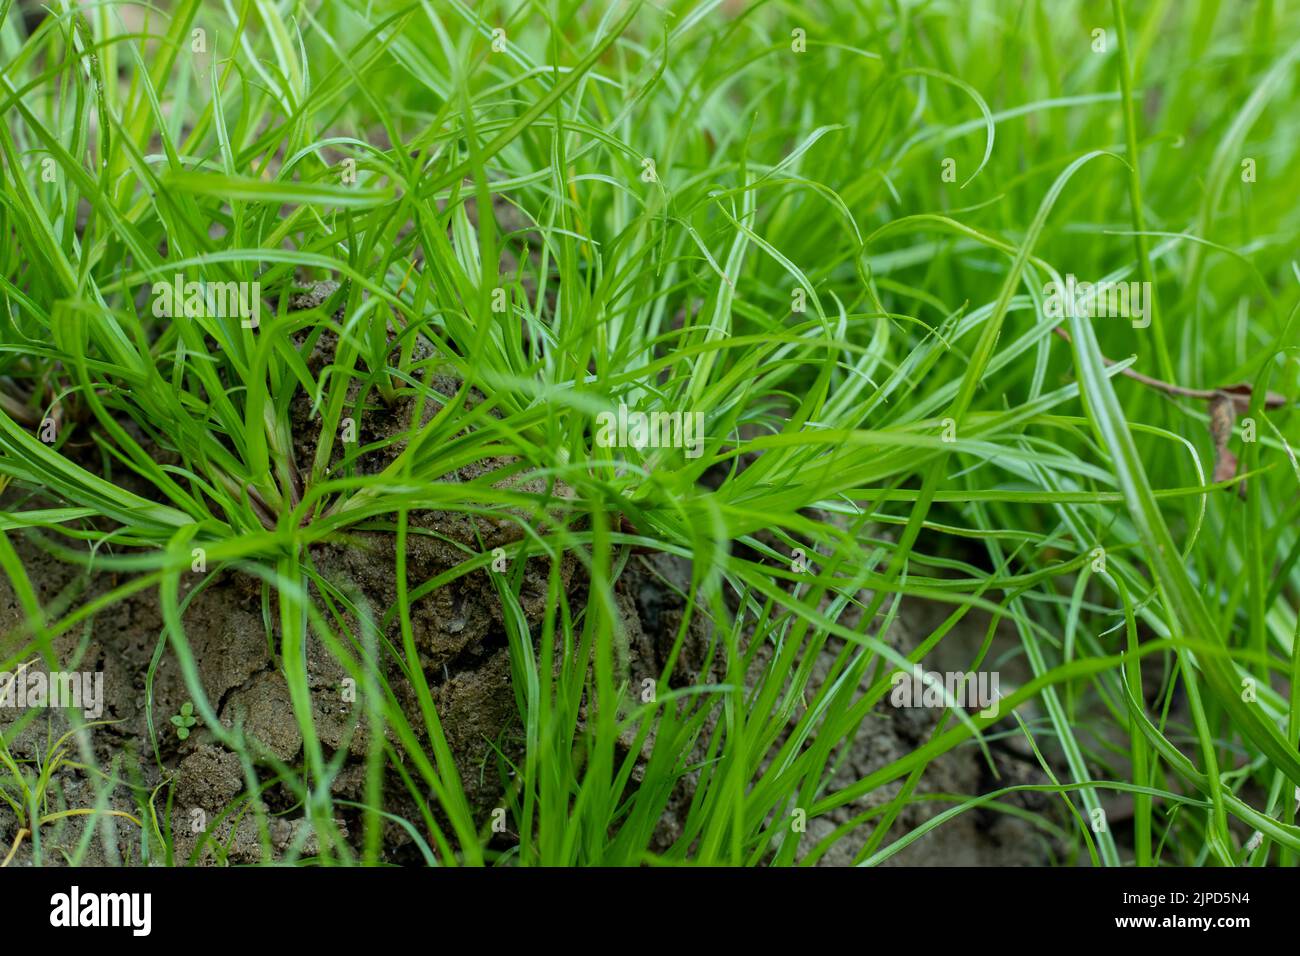 Small green grasses, Carex muskingumensis, commonly called palm sedge, is a dense, clump-forming sedge that is grown for its foliage effect. Sedge is Stock Photo